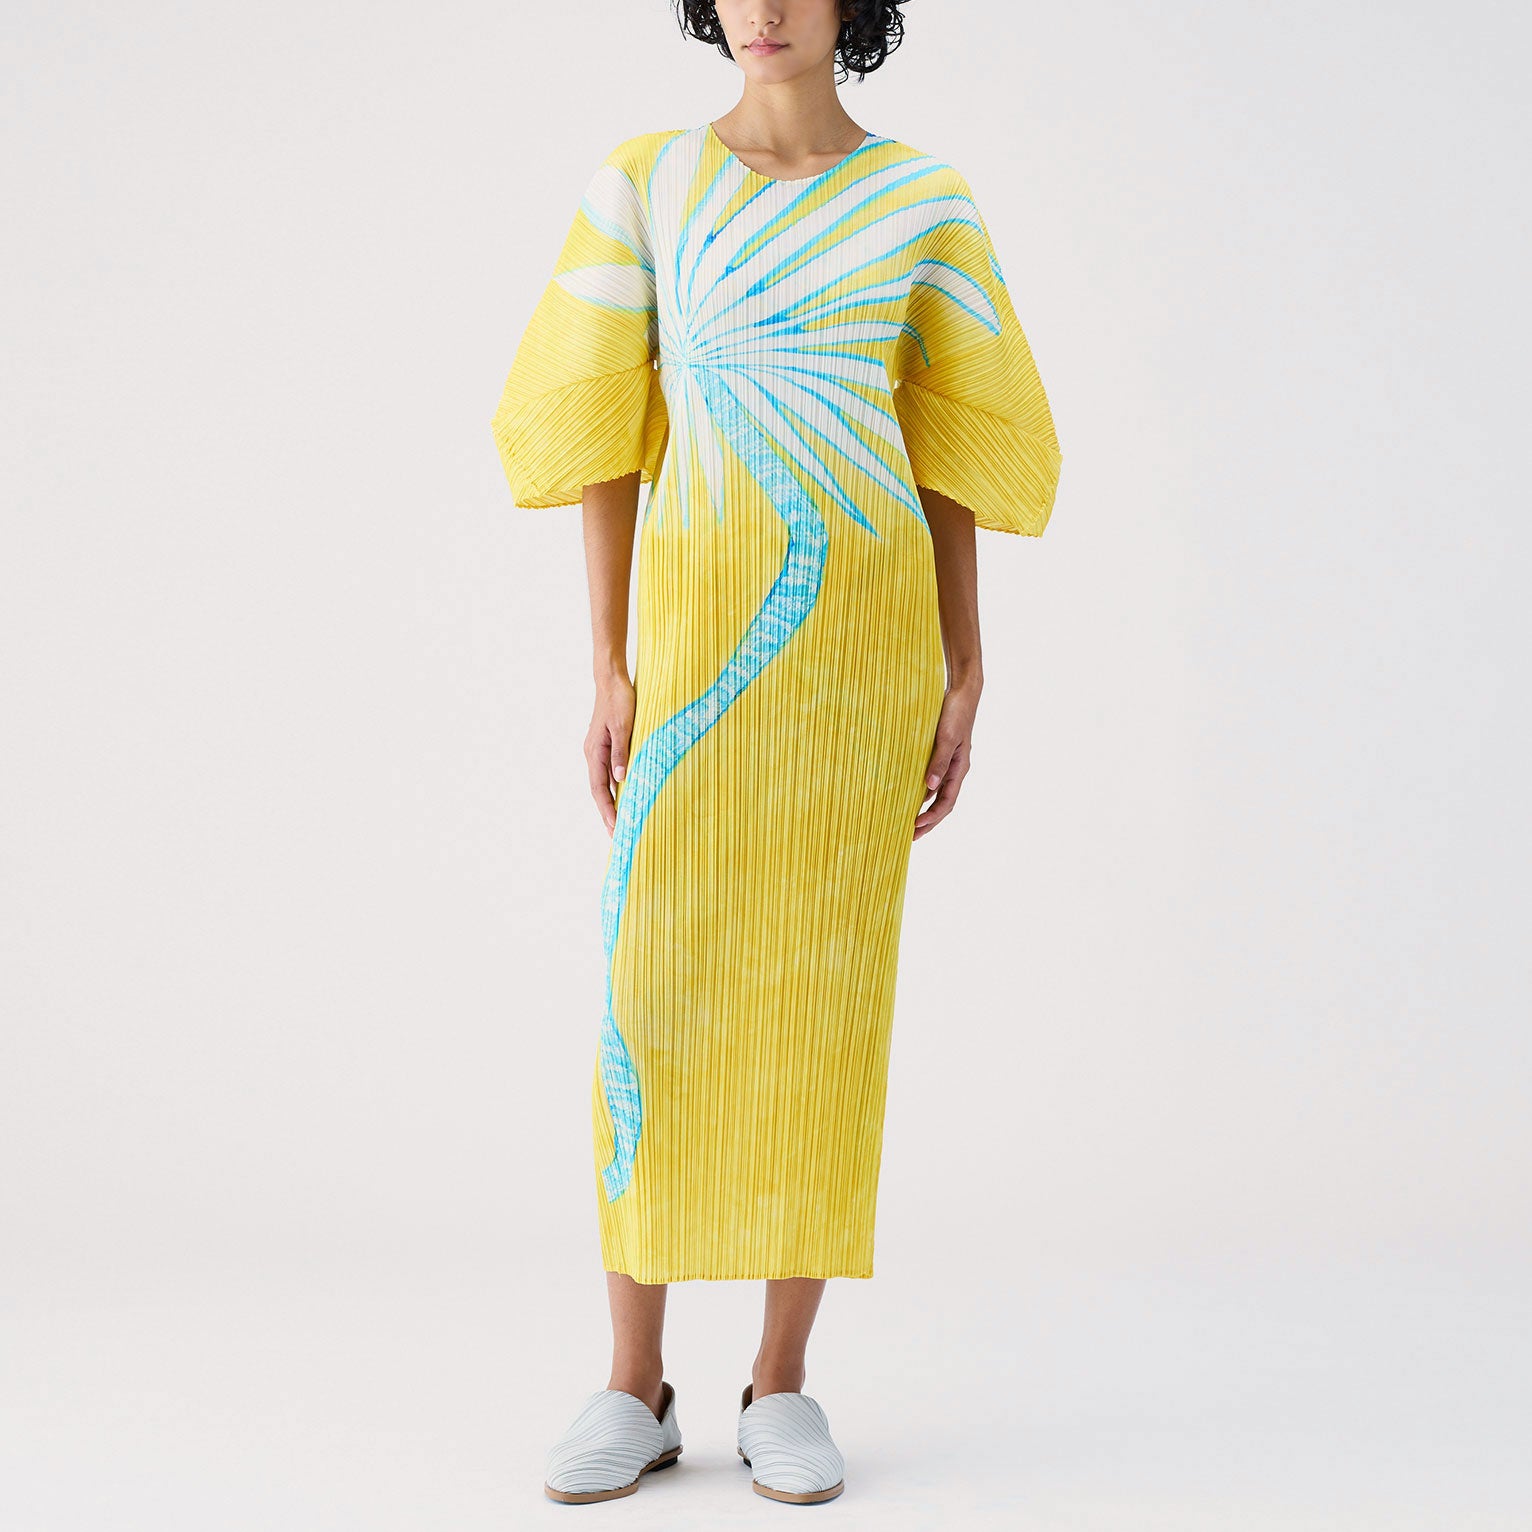 Full length yellow pleated dress with exaggerated 3/4 length sleeves and ice blue graphic if spindly plant.